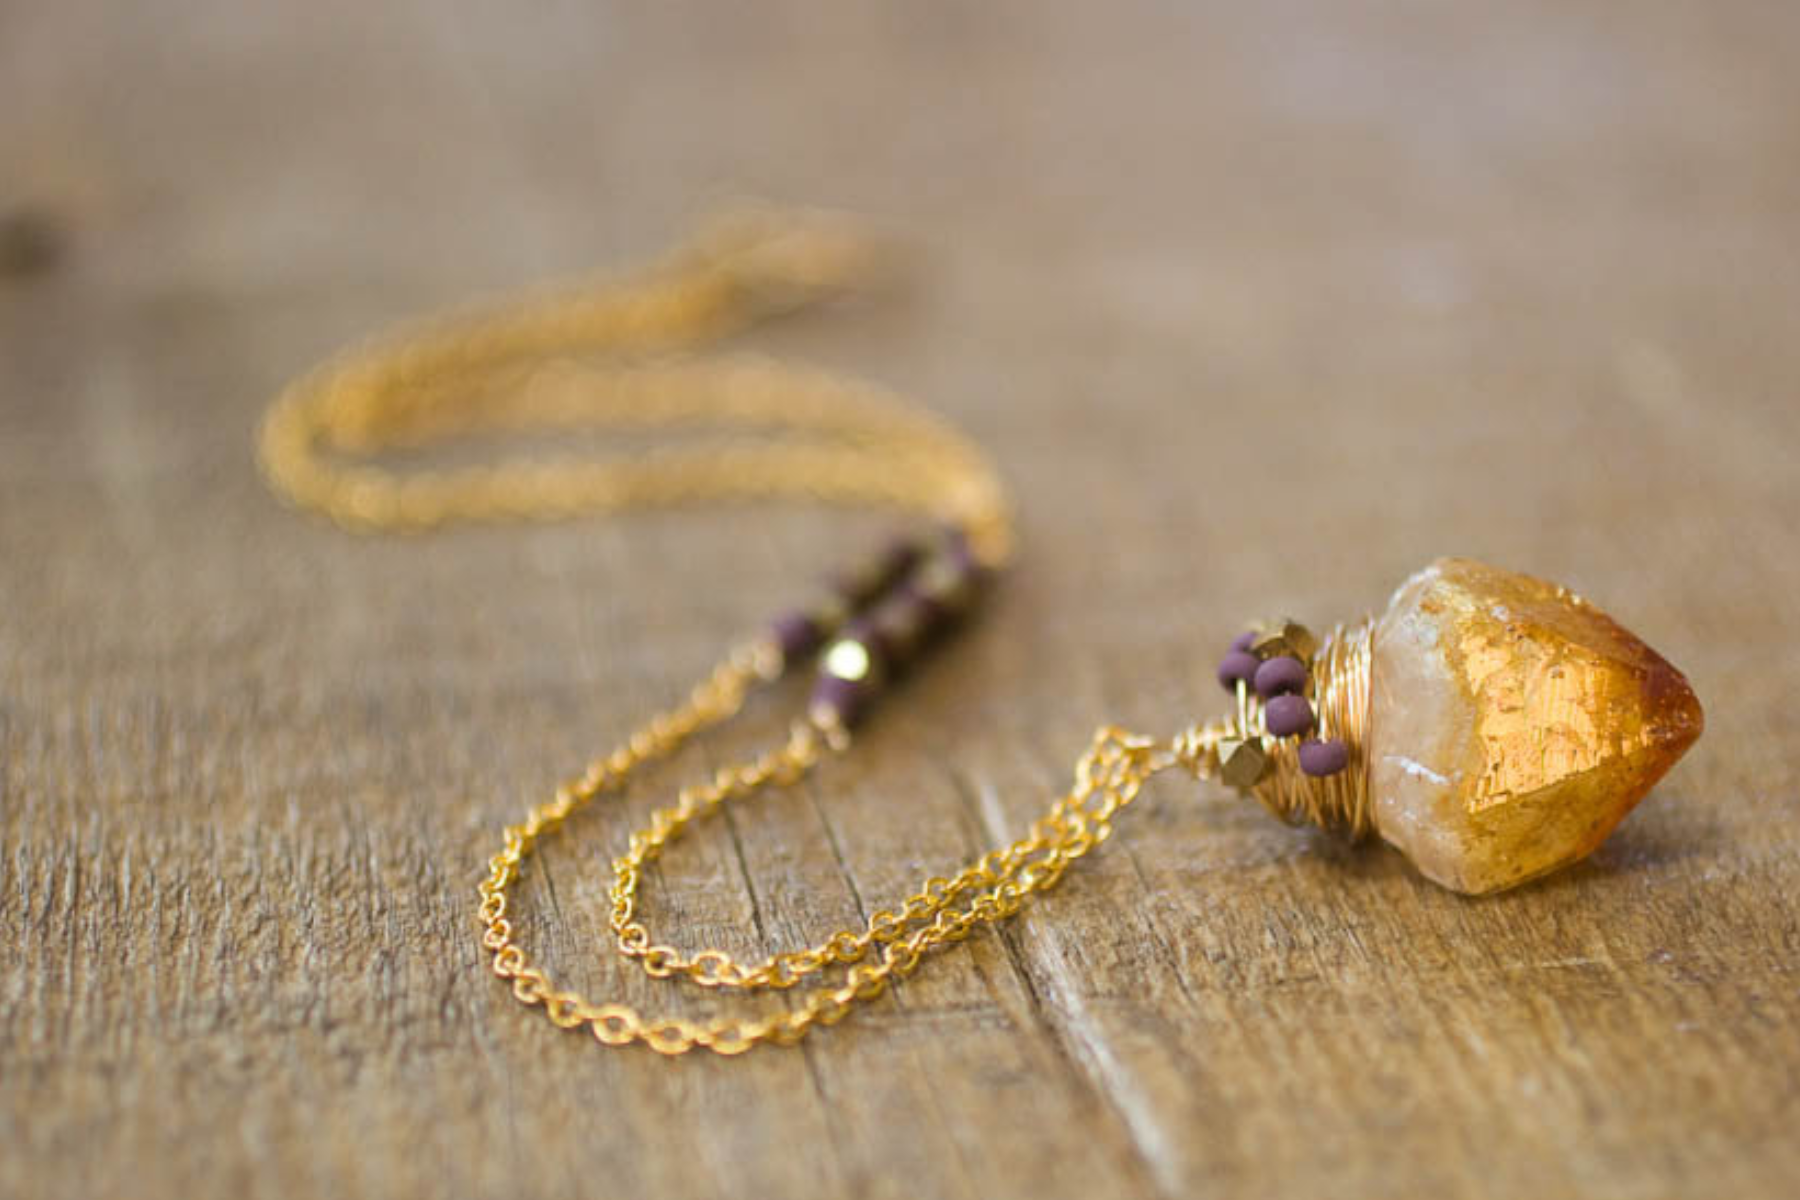 Citrine crystal pendant hanging from gold lace